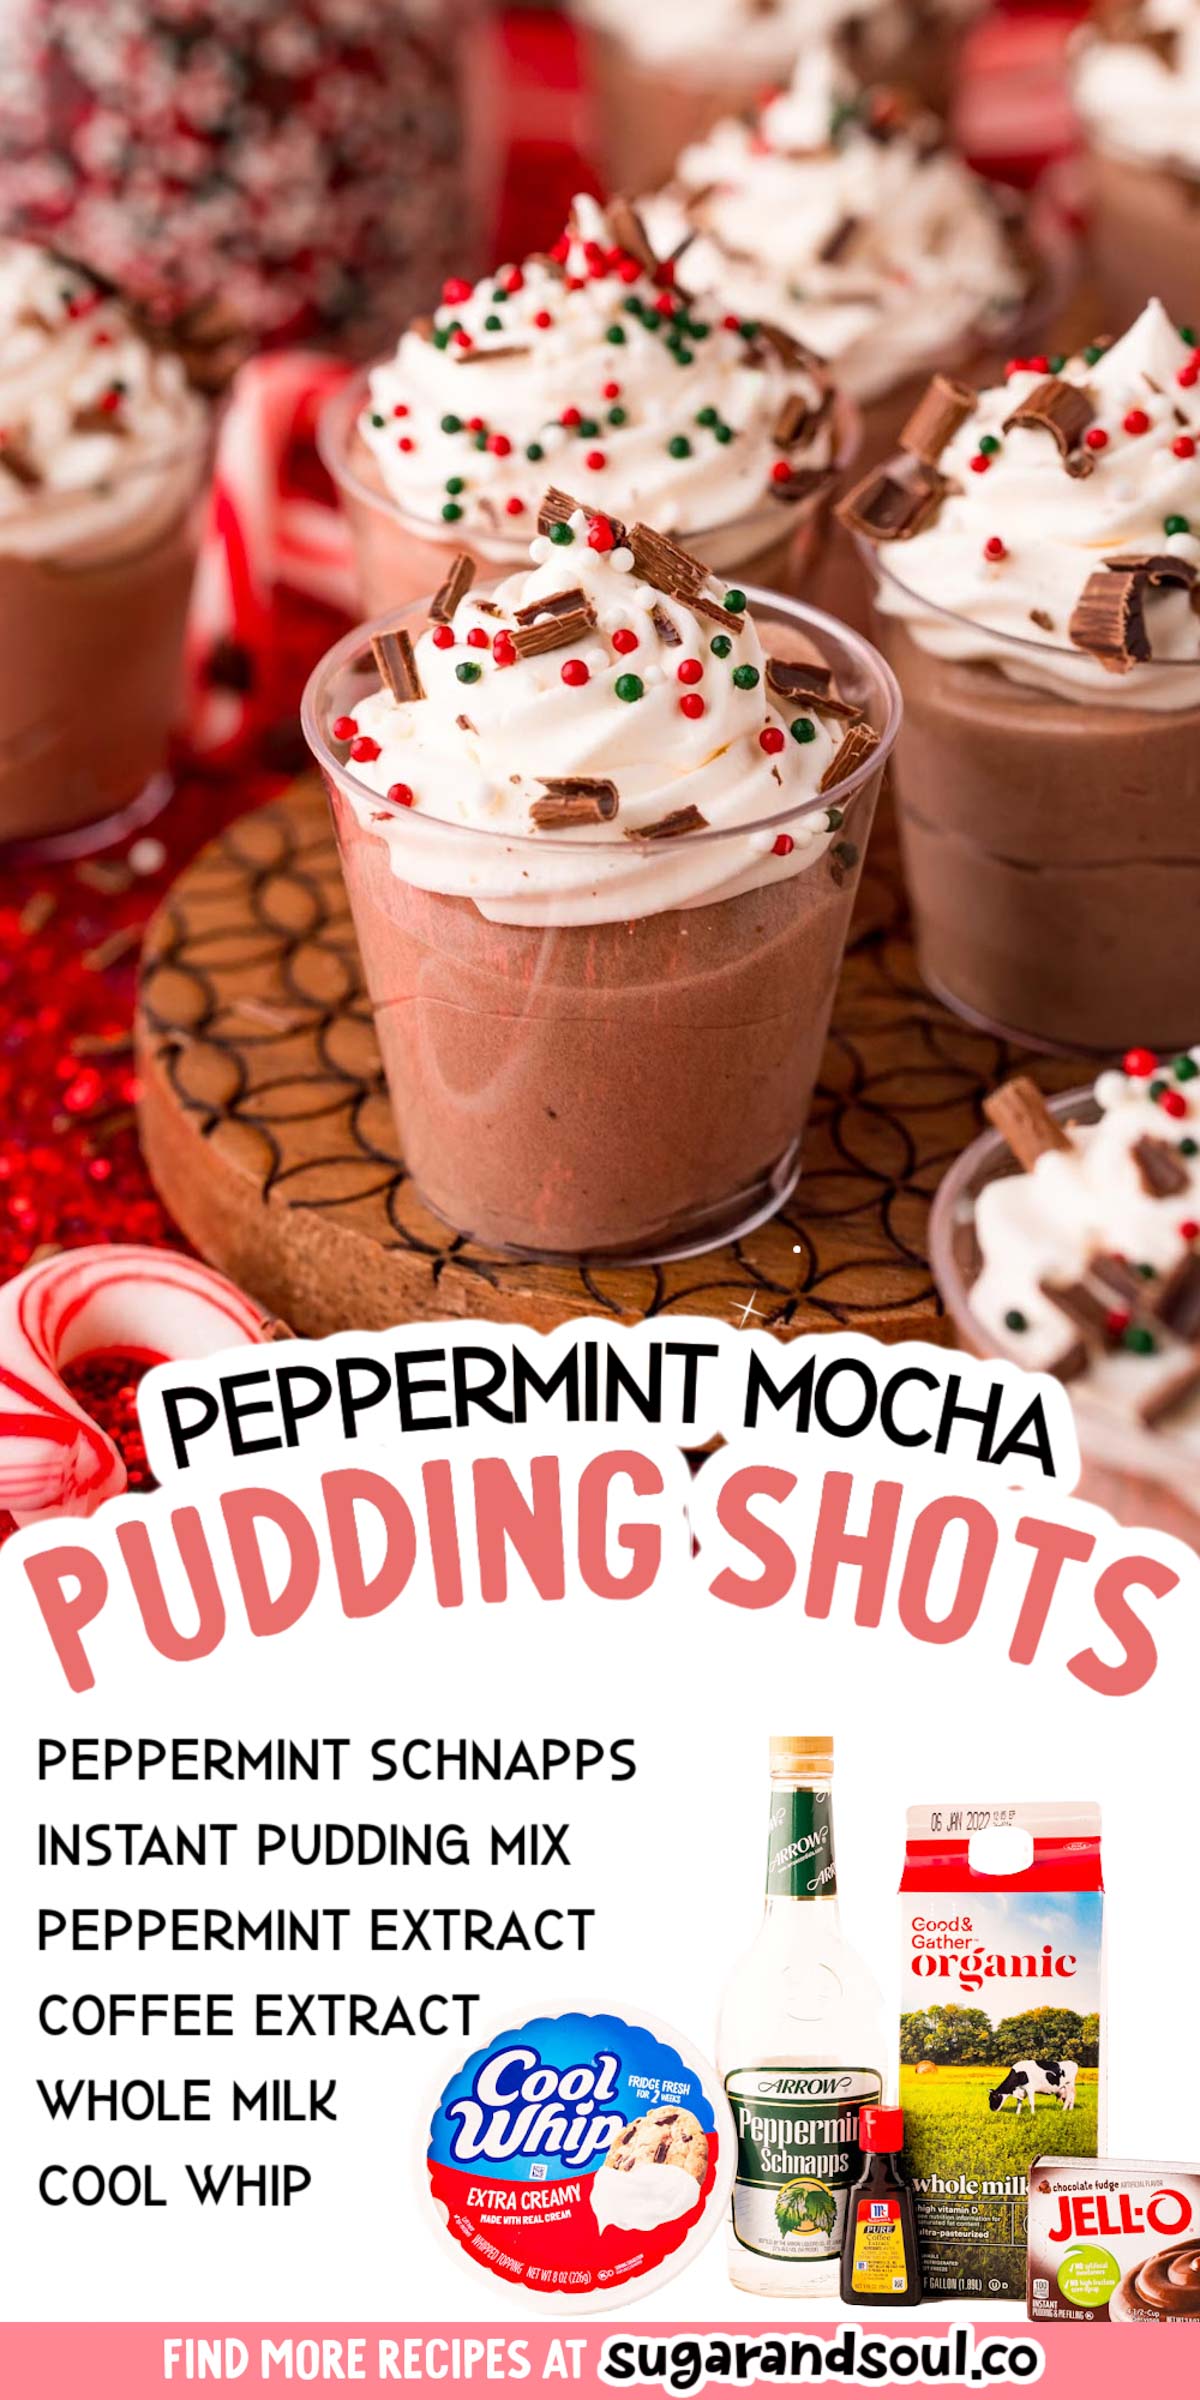 Peppermint Mocha Pudding Shots is a creamy, seasonal dessert that's made with only 6 ingredients and perfect for those adult holiday parties! Prep about two dozen shots in just 5 to 10 minutes! via @sugarandsoulco